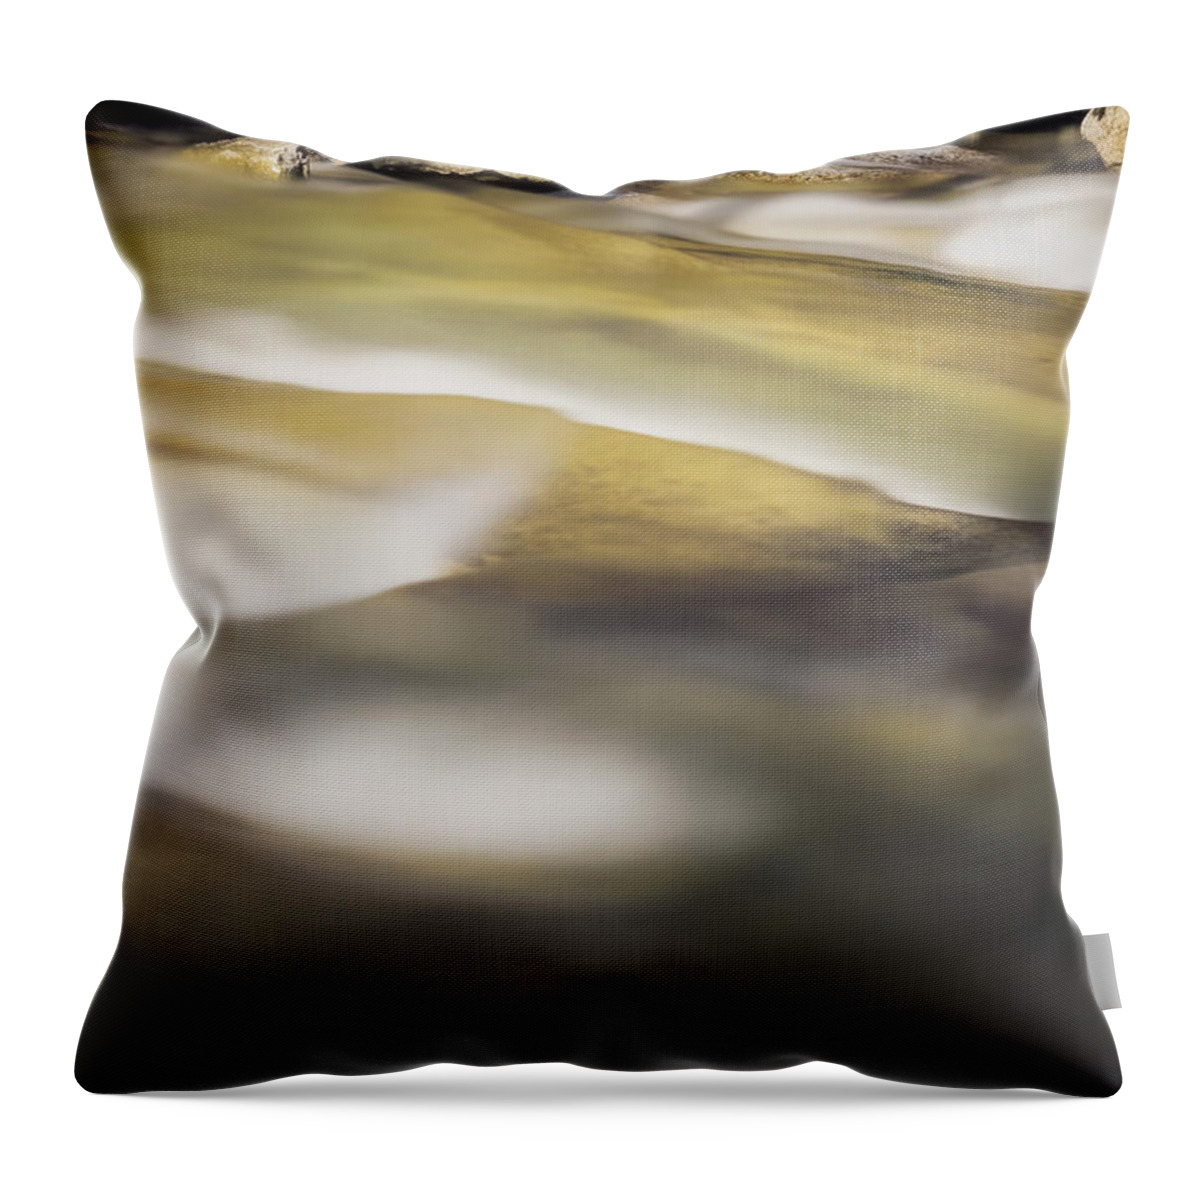 Stickney Brook Throw Pillow featuring the photograph Stickney Brook Abstract by Tom Singleton